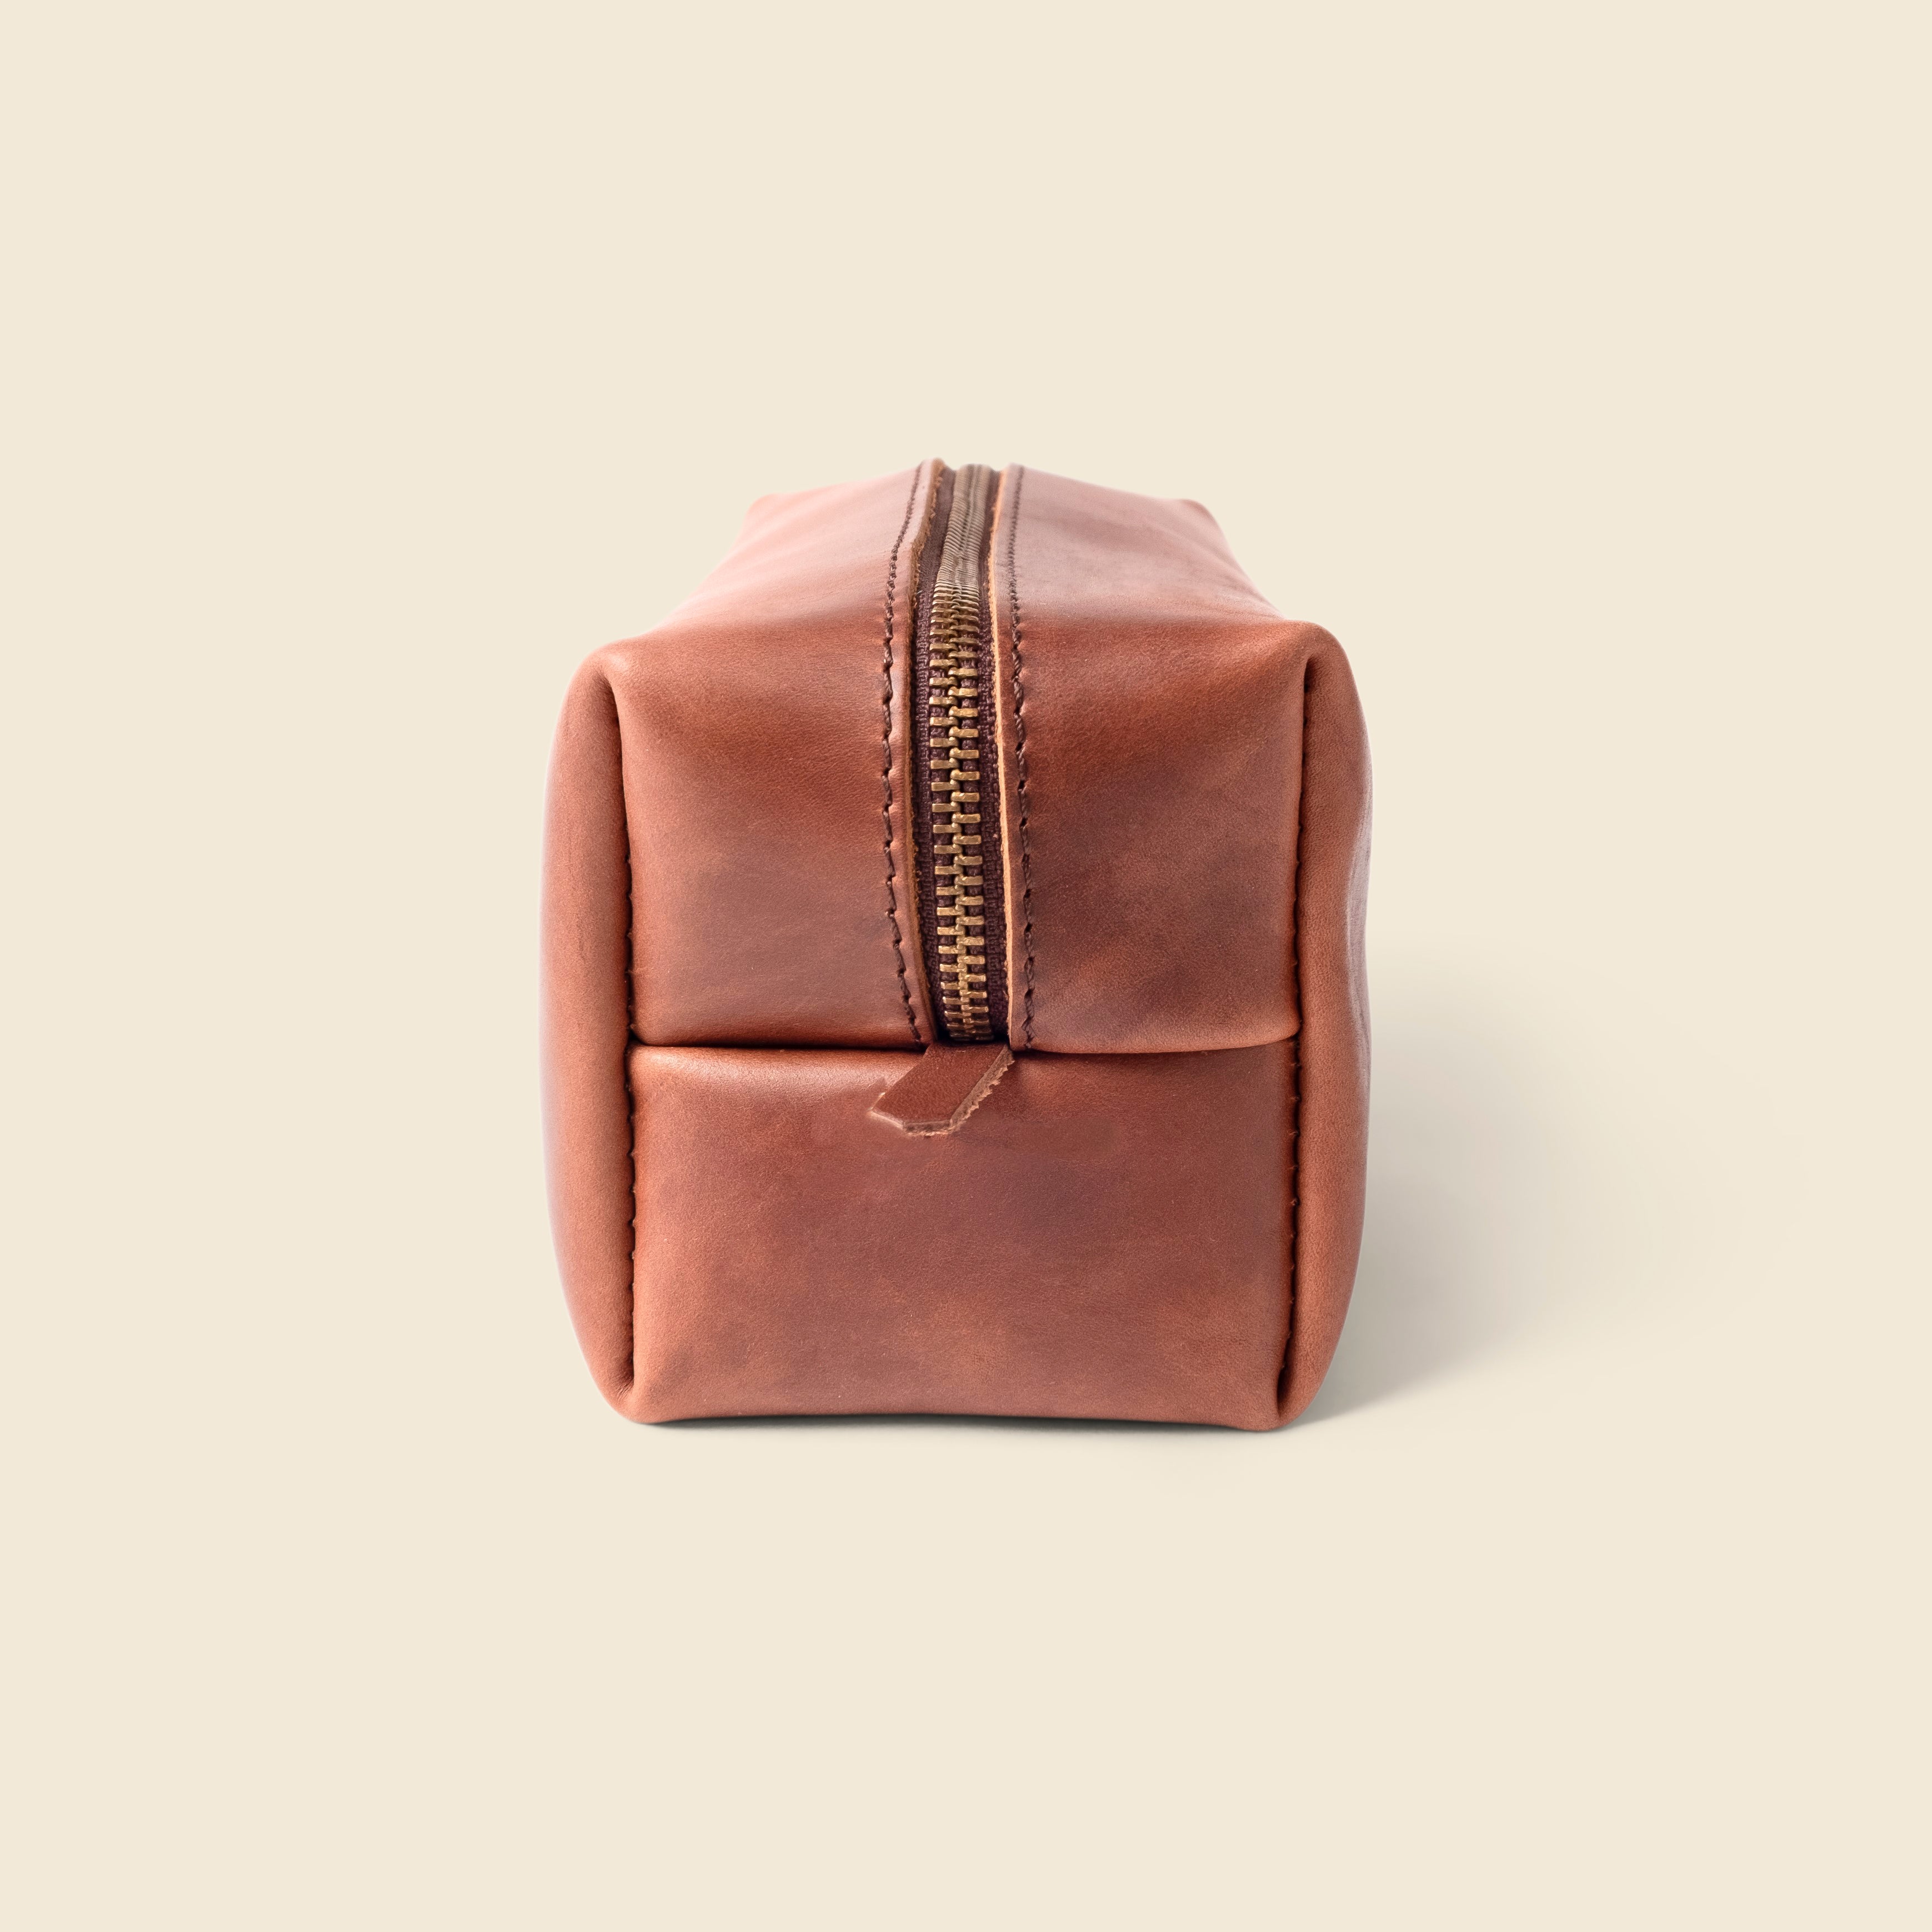 leather toiletry bag for corporate gifts